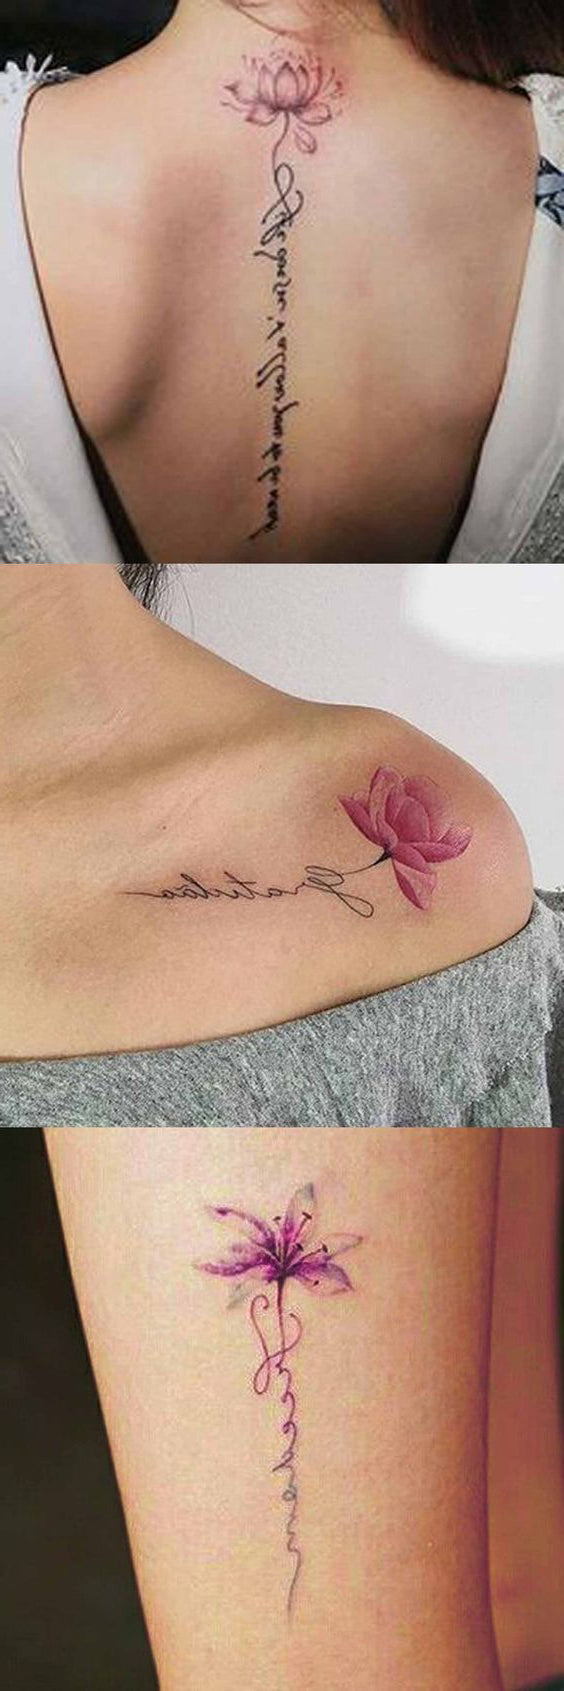 280 Unique Meaningful Tattoo Ideas Designs 2020 Symbols With Deep Meaning